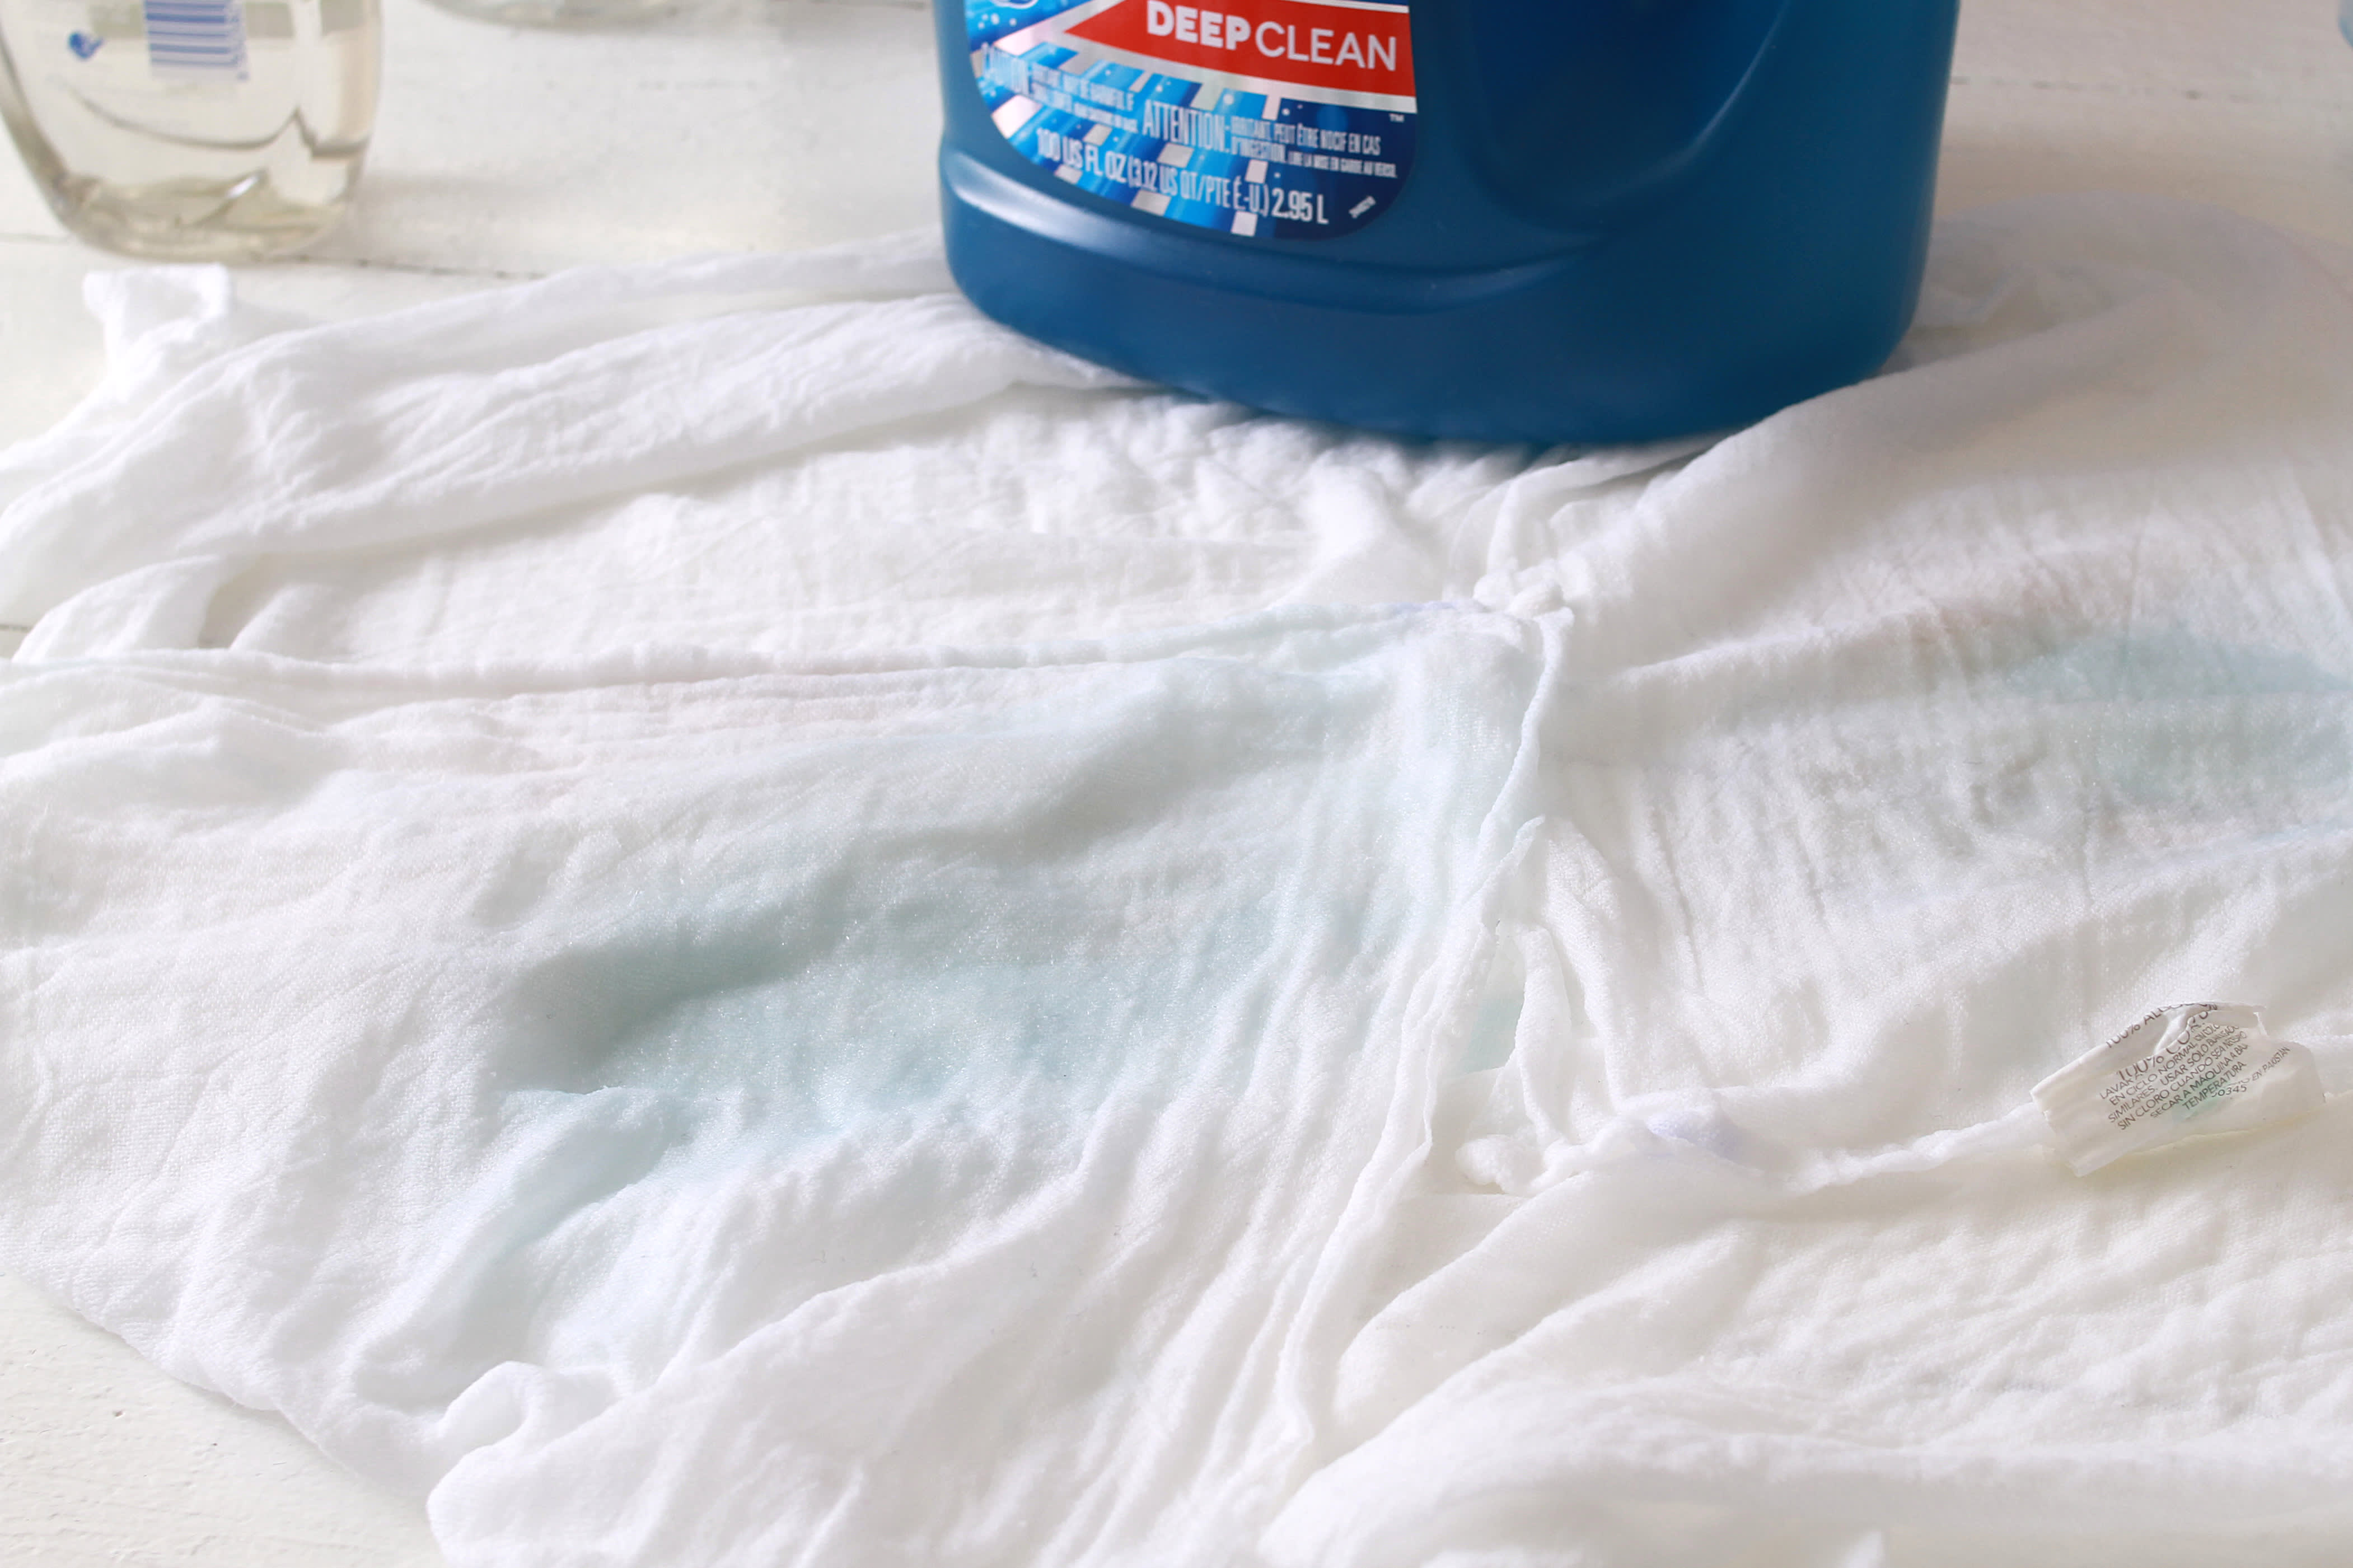 How to Remove blood stains with Martha Stewart's REAL SIMPLE